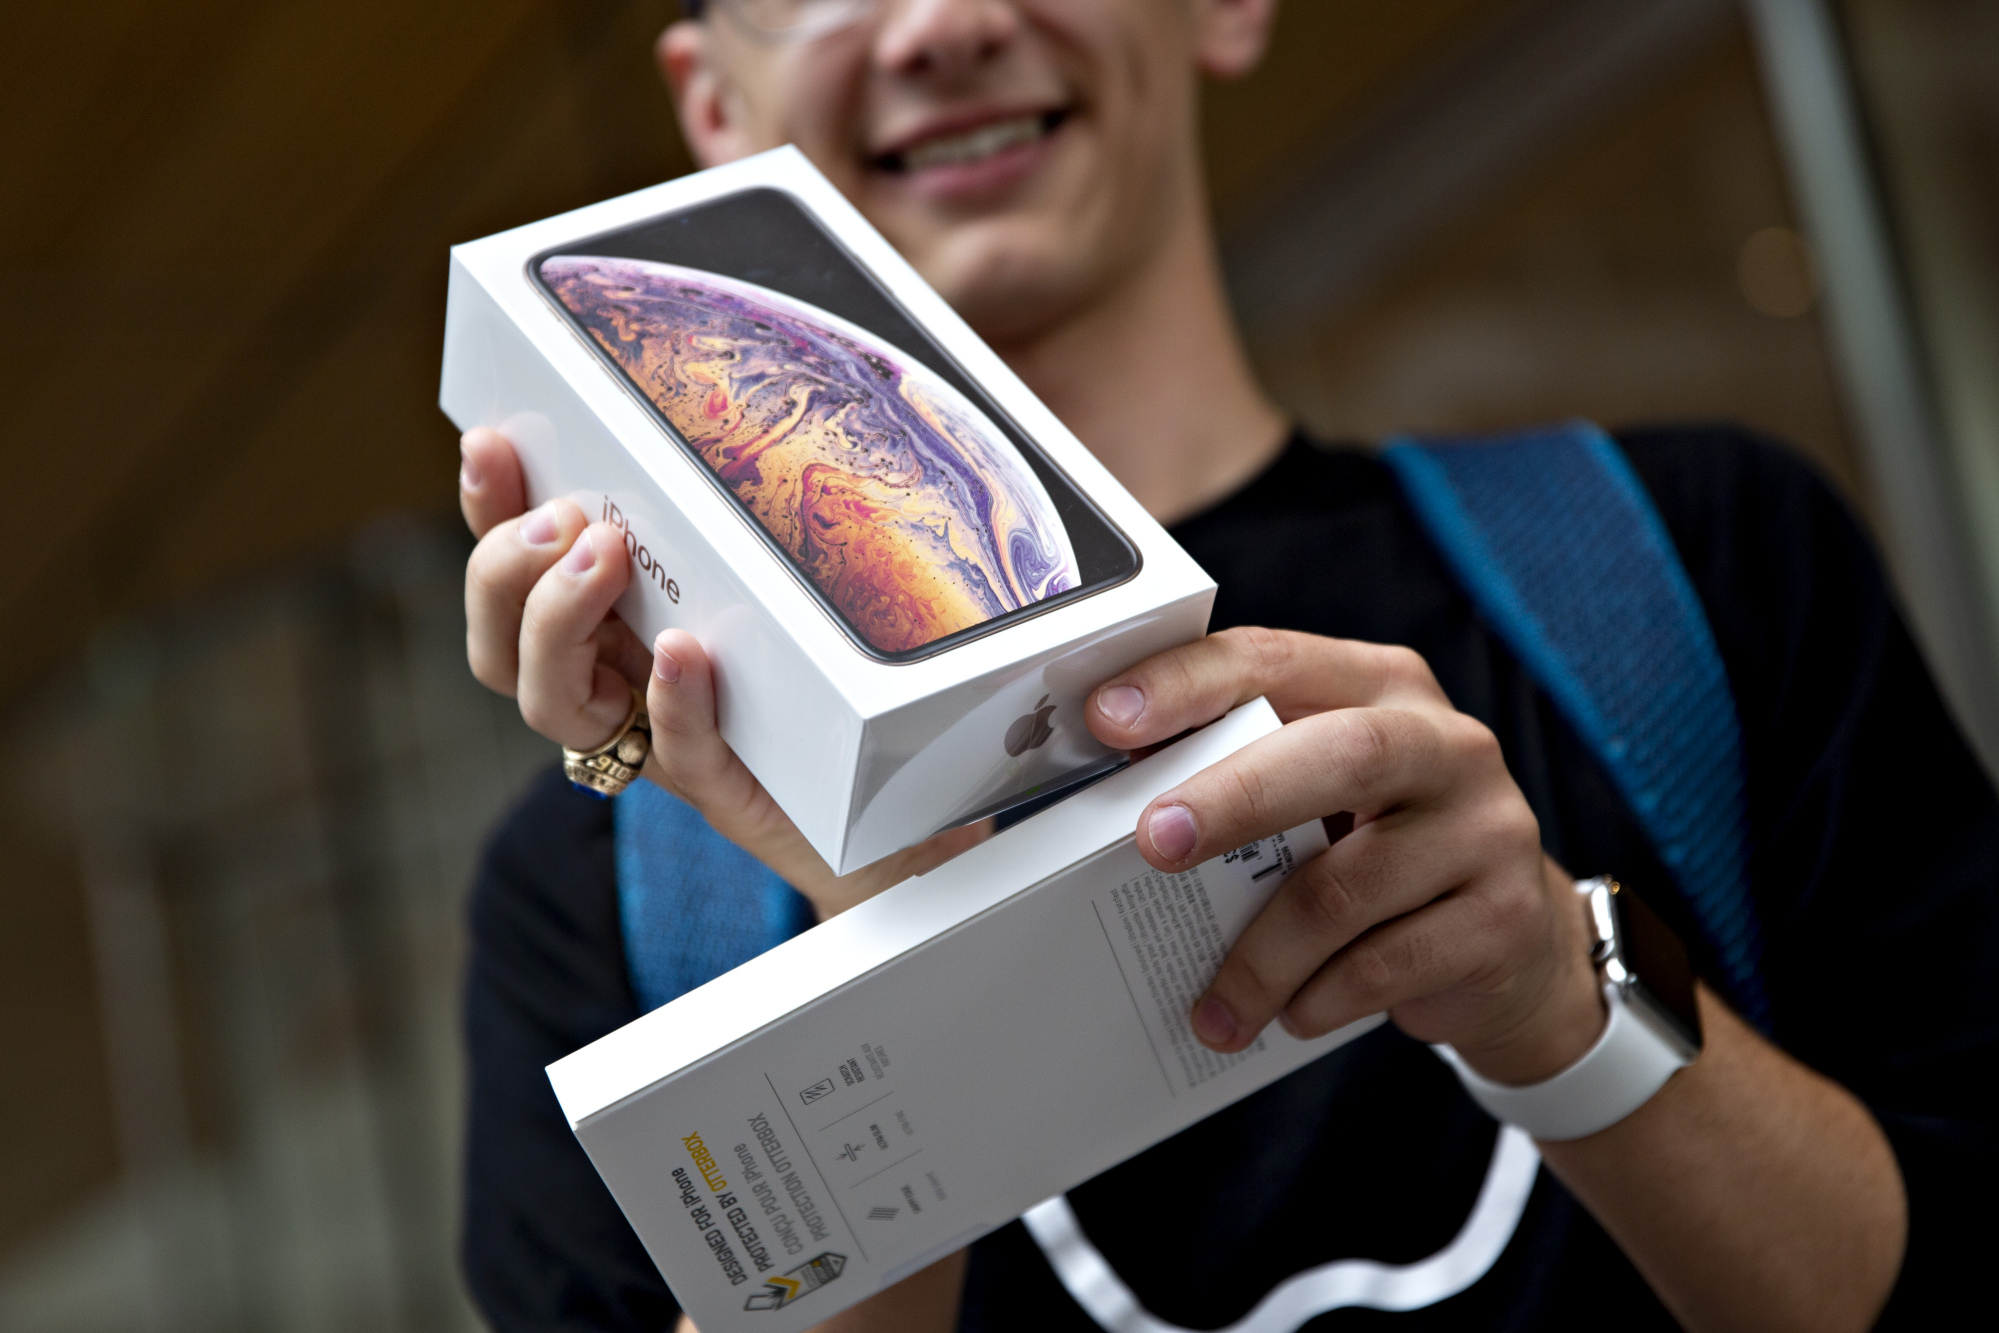 Apple Inc. iPhone Xs And Apple Watch Series 4 Go On Sale